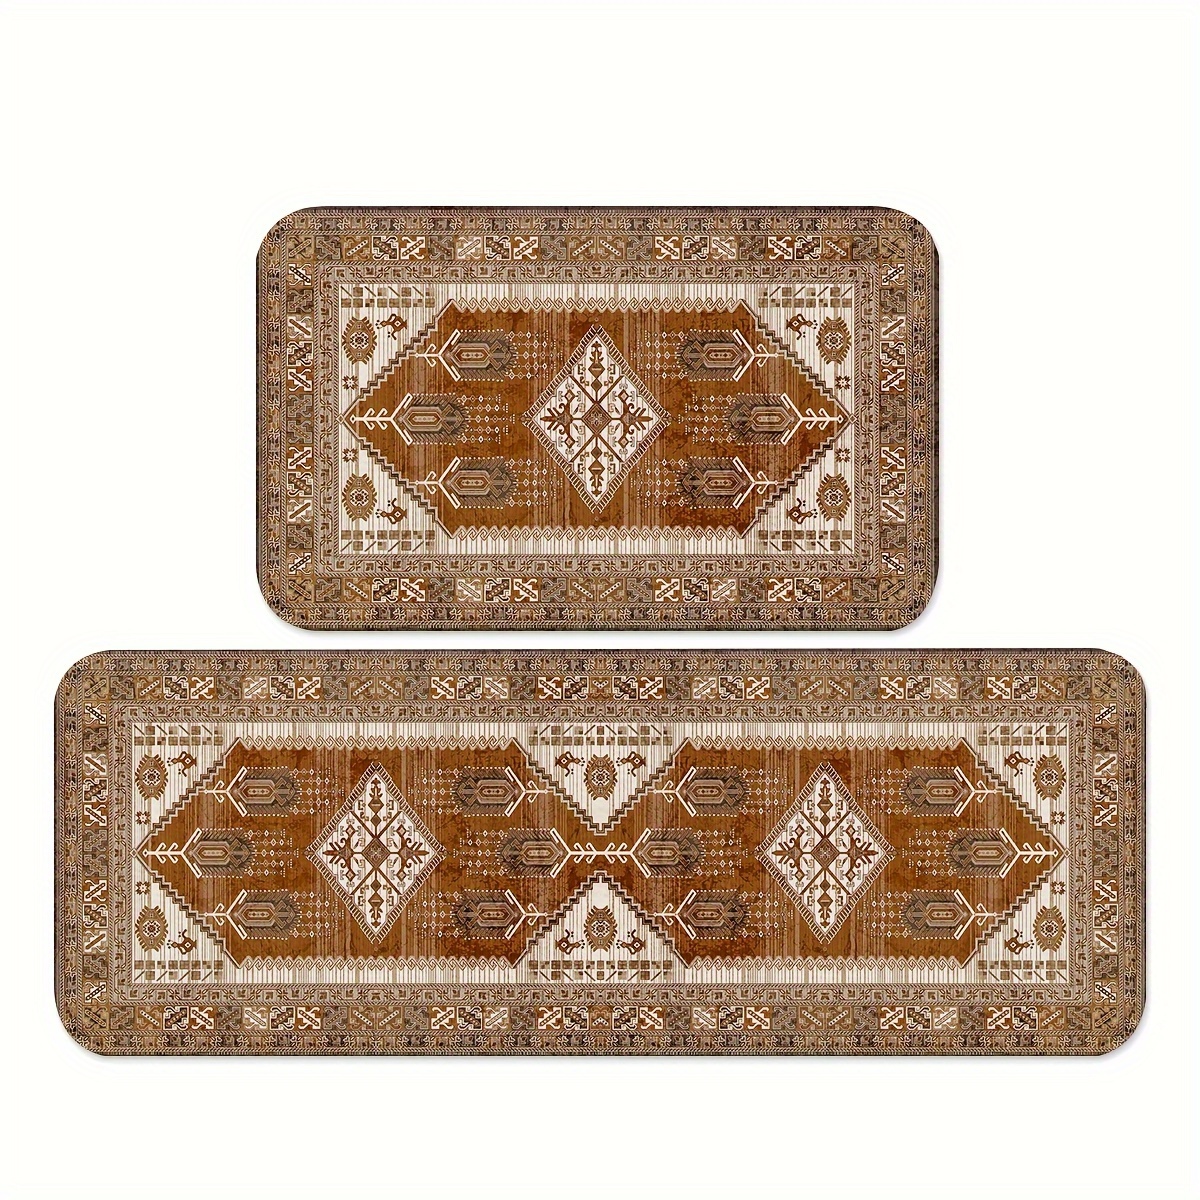 

1/2pcs Farmhouse Kitchen Mats, Household Decorative Carpets, Non-slip Absorbent Entrance Pads, Washable Runner Rugs, For Kitchen, Home, Office, Sink, Laundry, Bathroom, Spring Decor, Sets 2 Piece